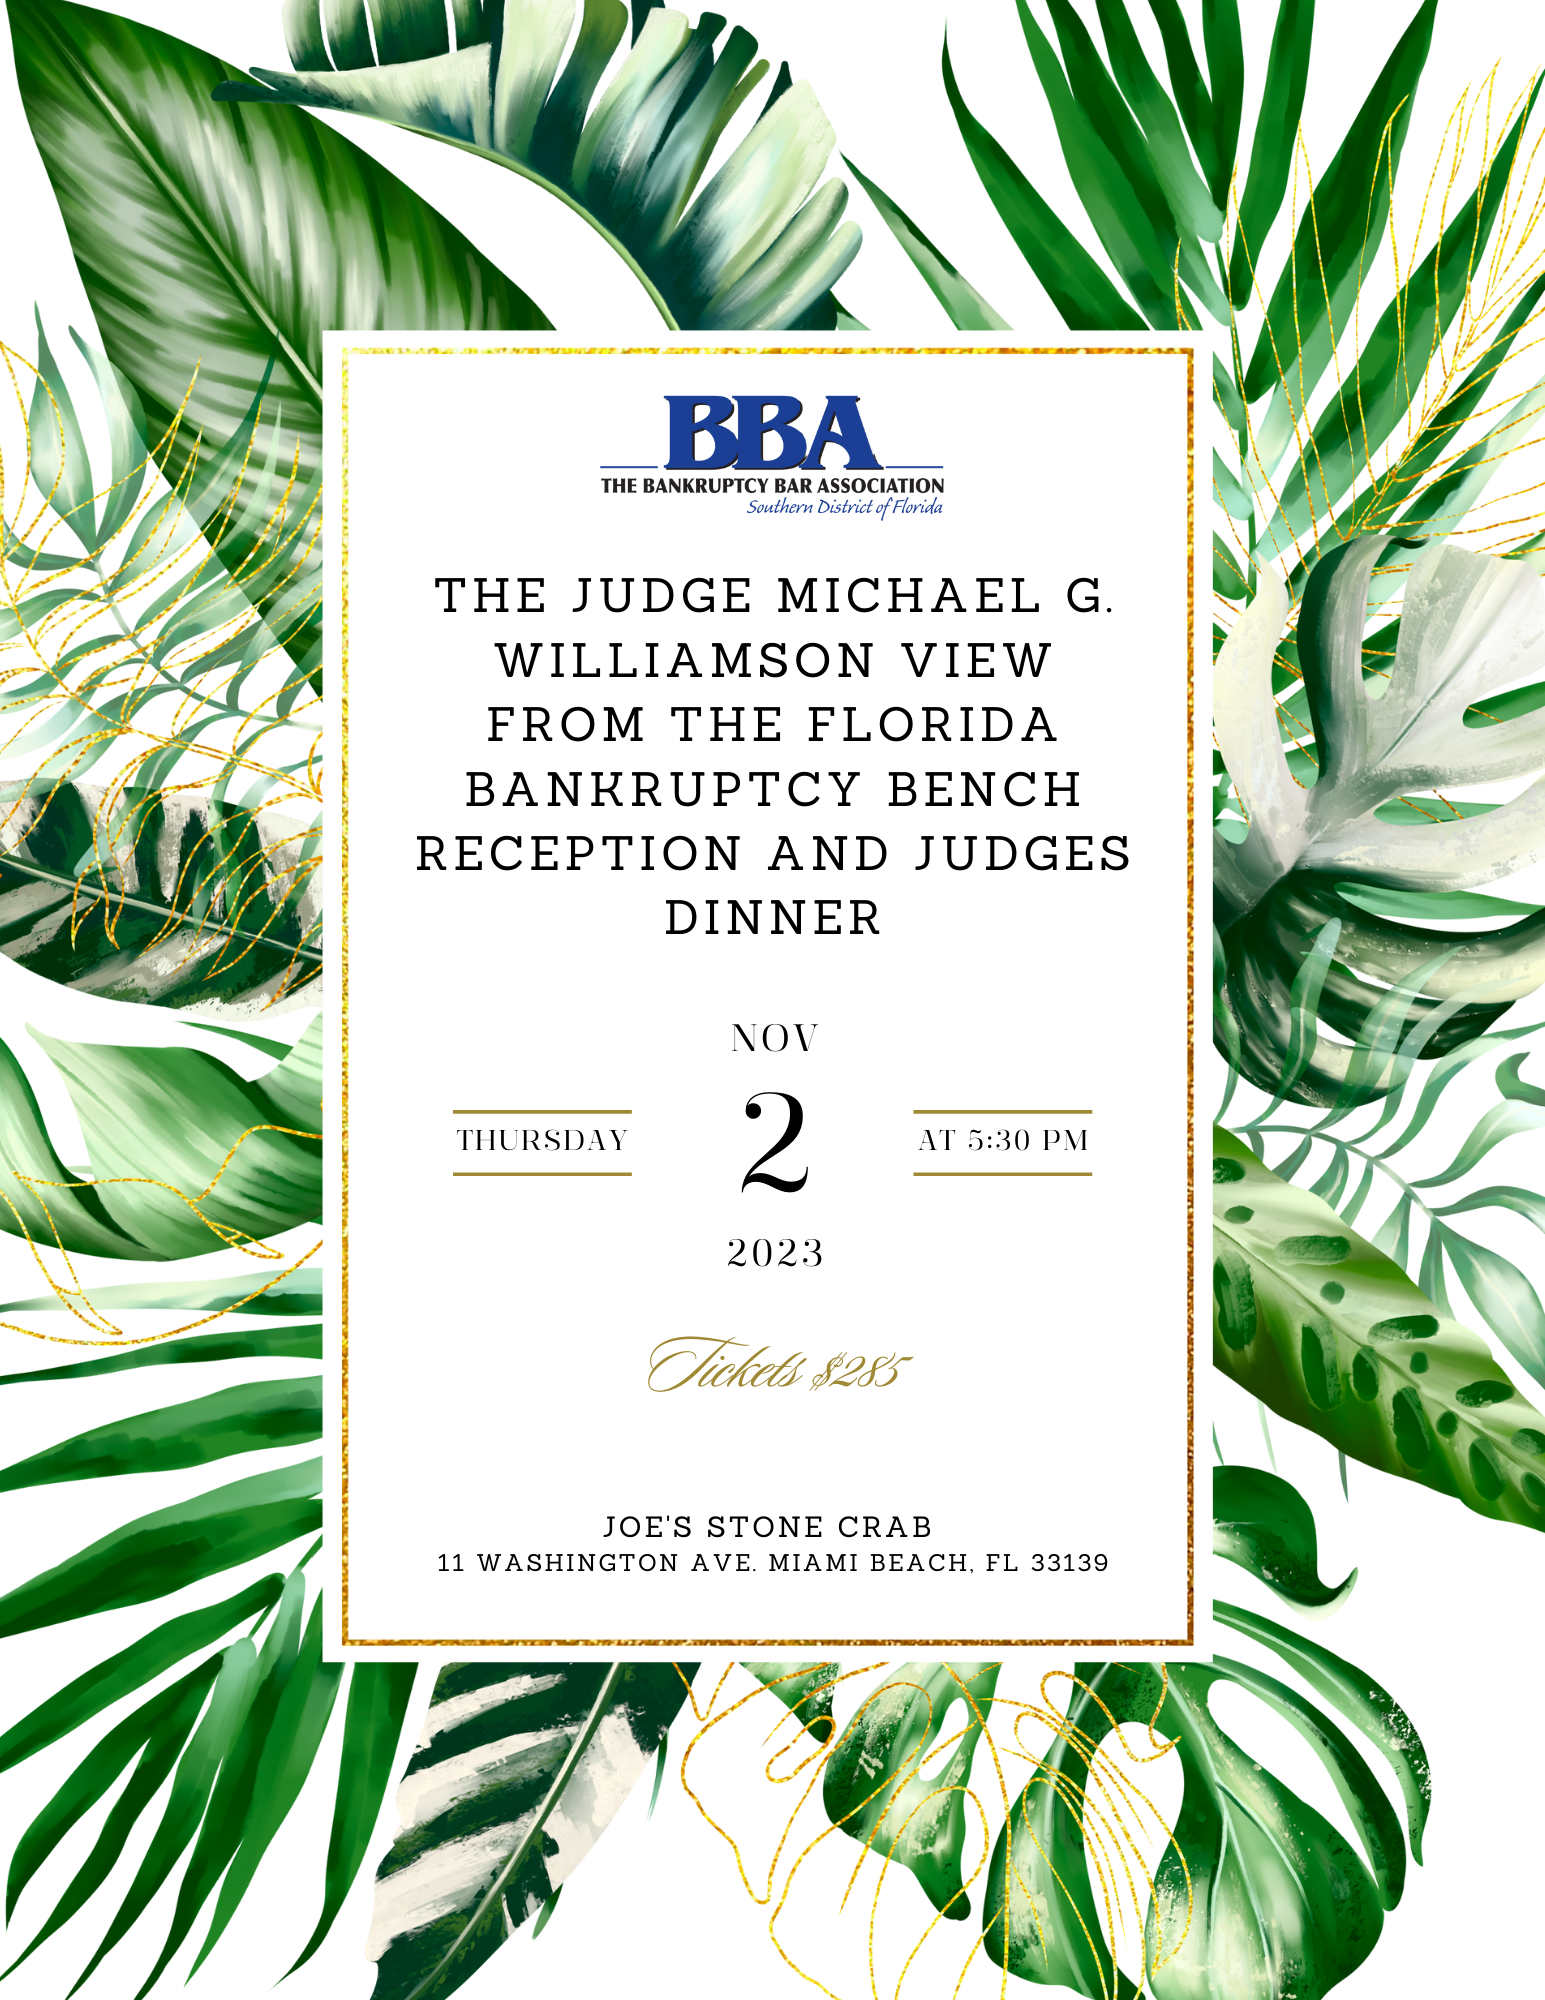 The Judge Michael G. Williamson View from the Florida Bankruptcy Bench Reception and Judges Dinner